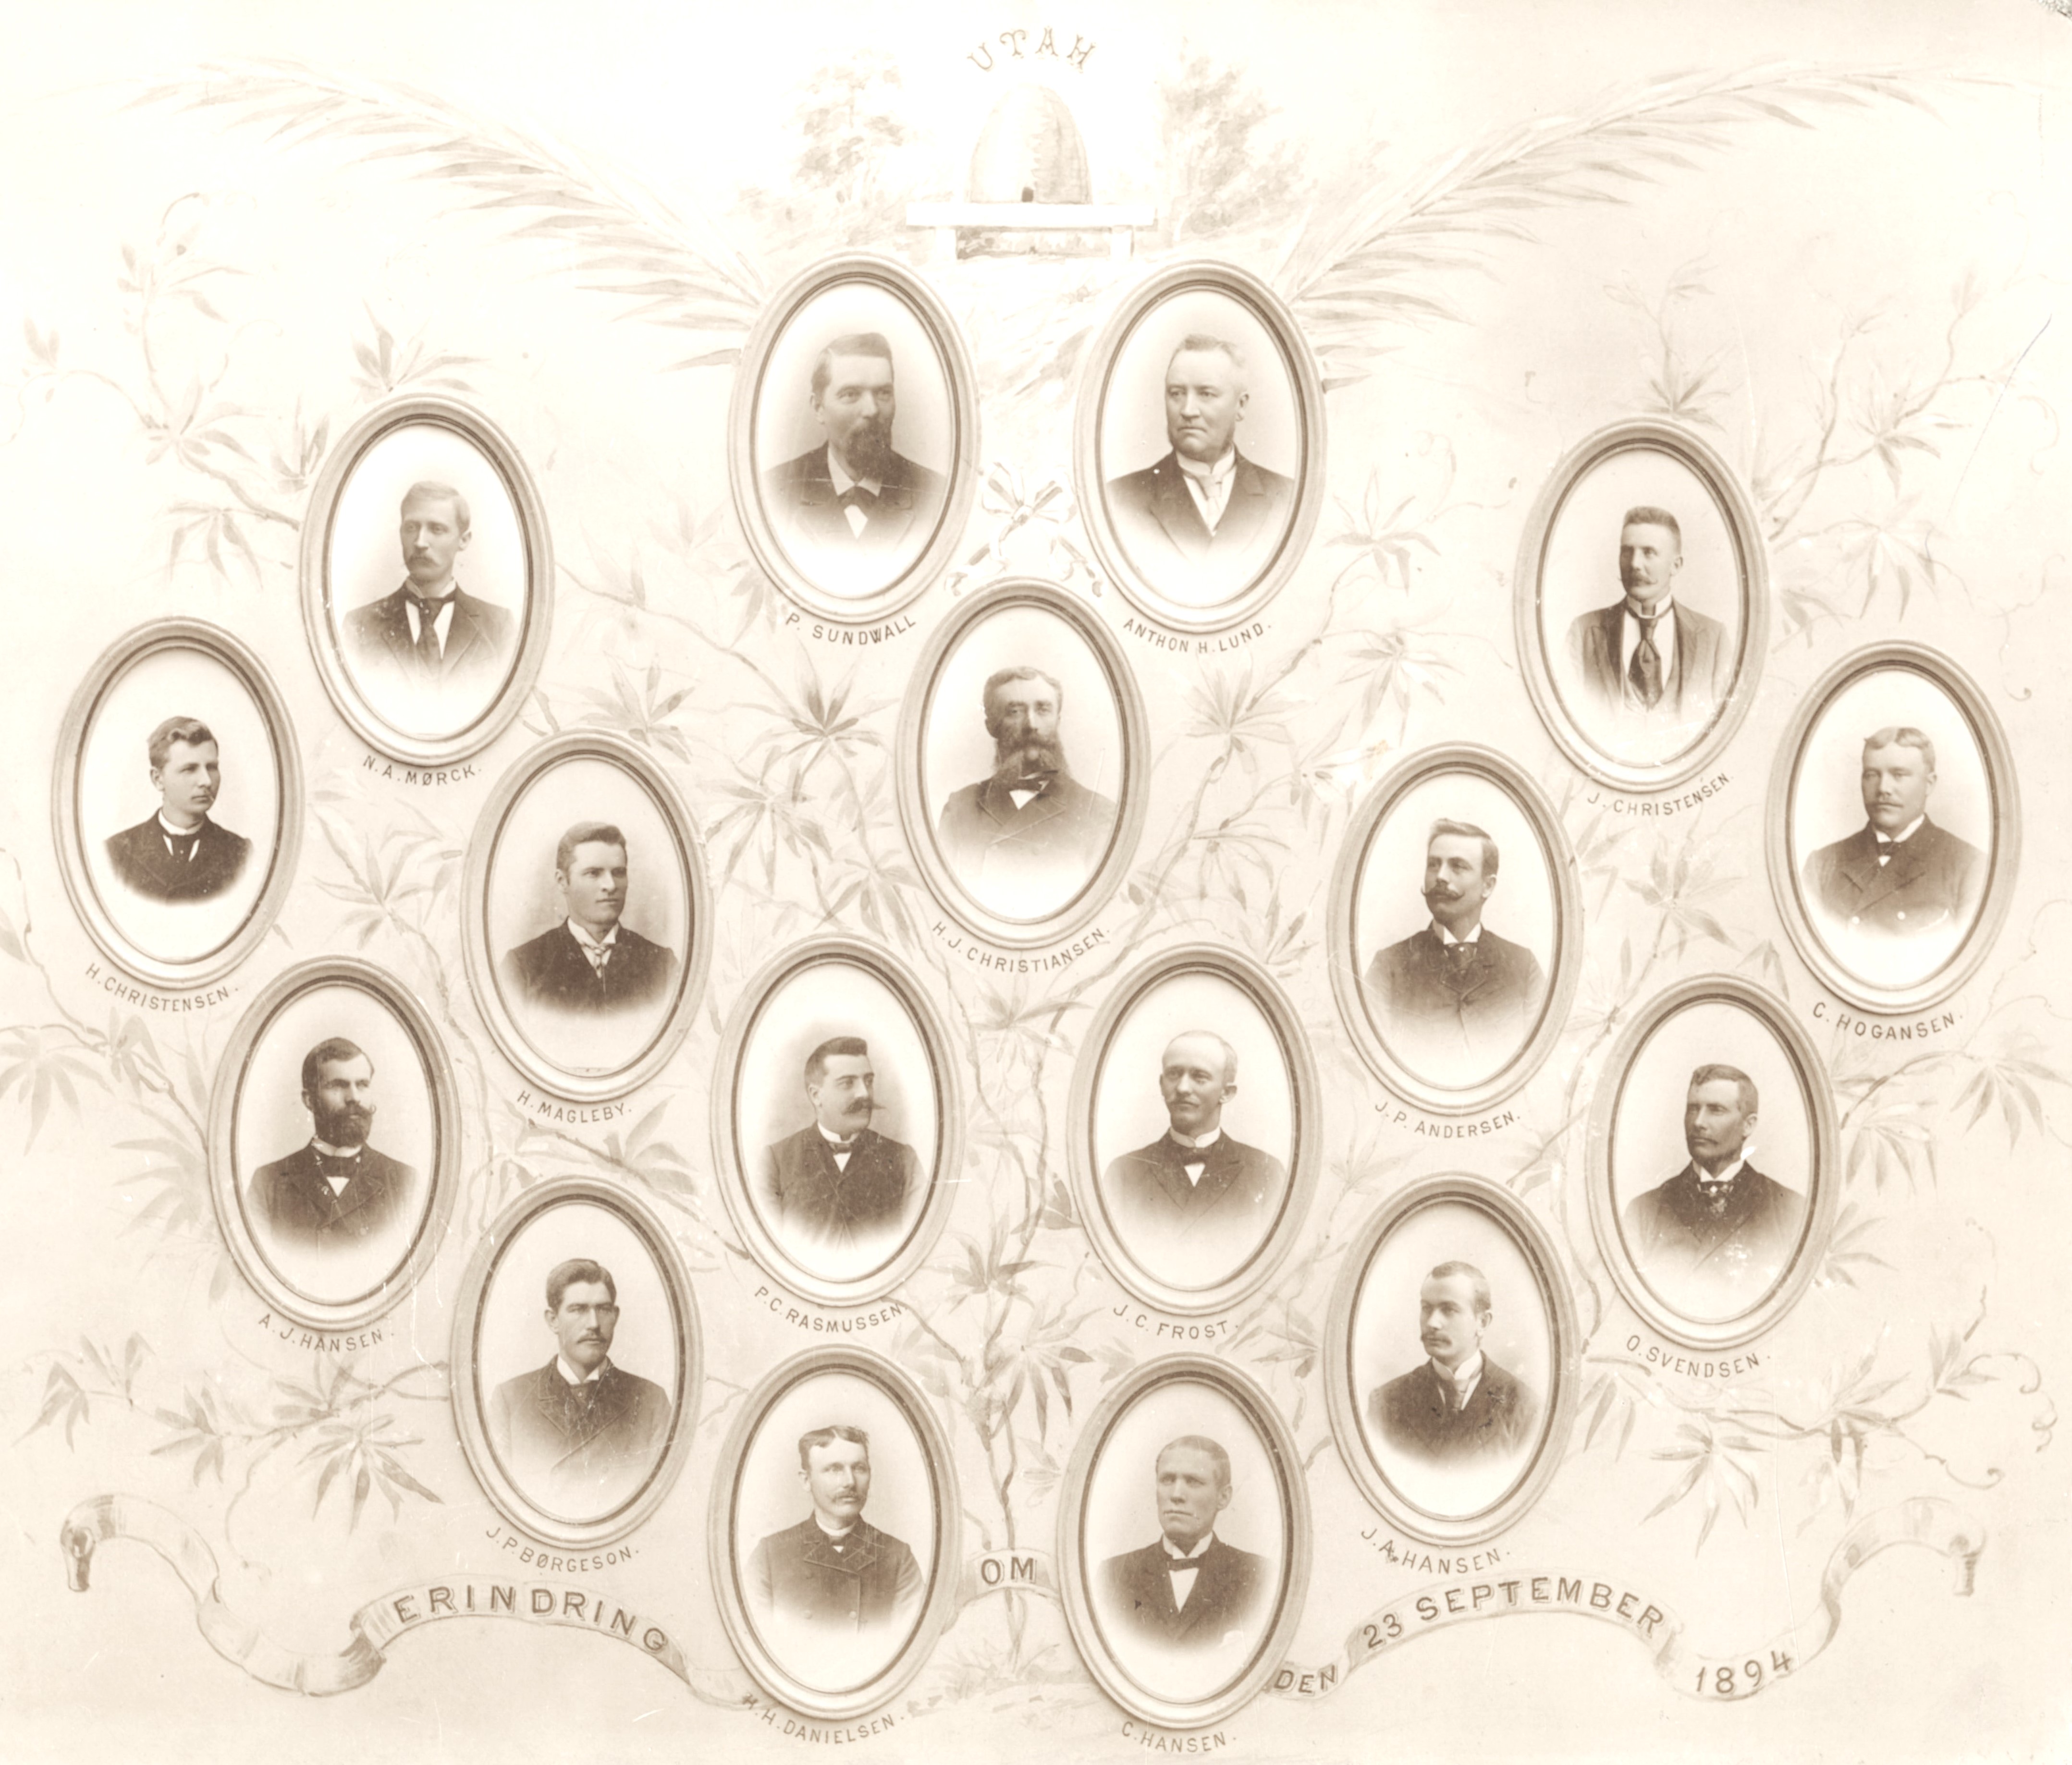 Christiania Conference, Scandinavian Mission,  1894 September 23